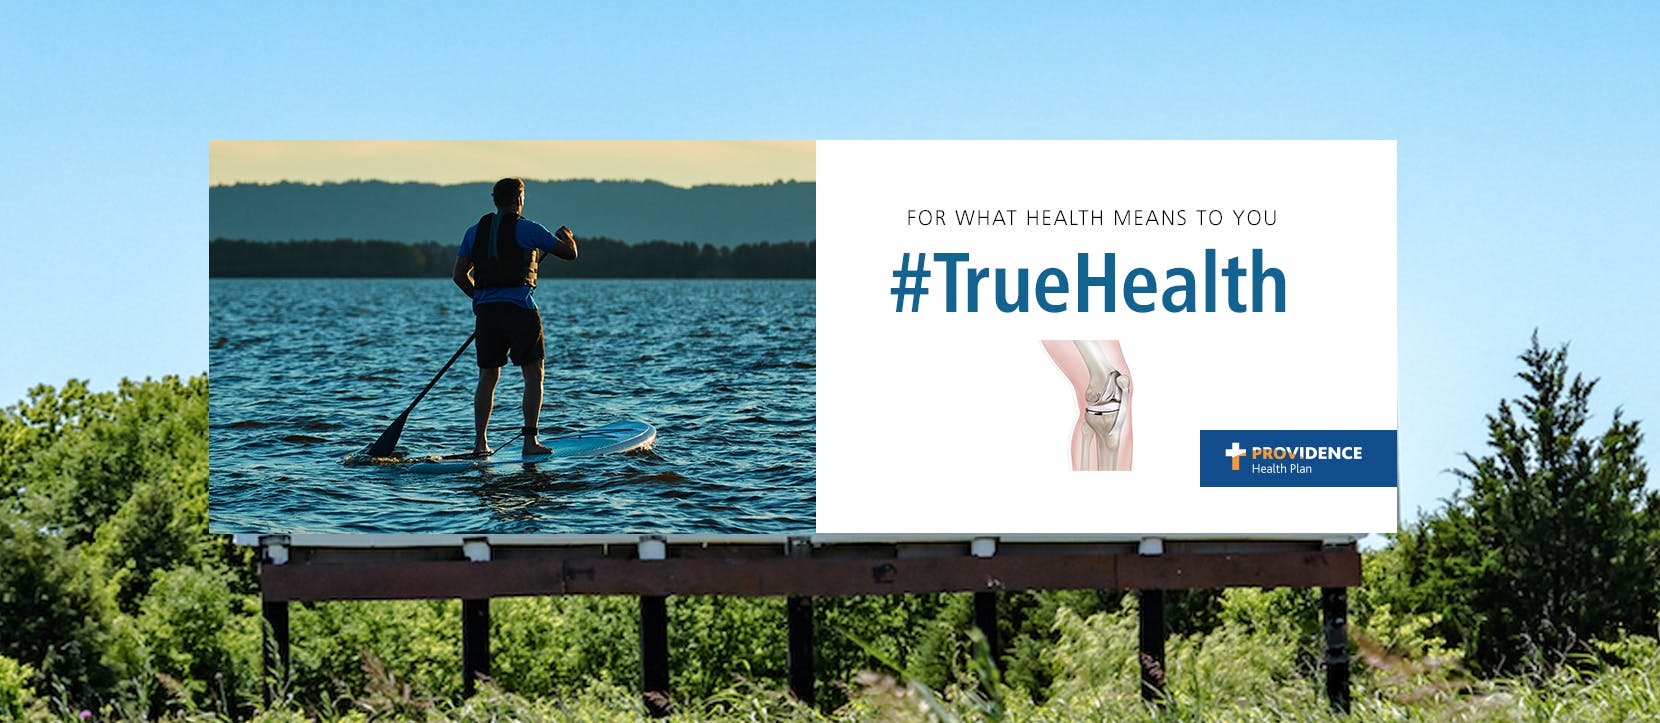 Image from Providence billboard ad #TrueHealth for what health means to you